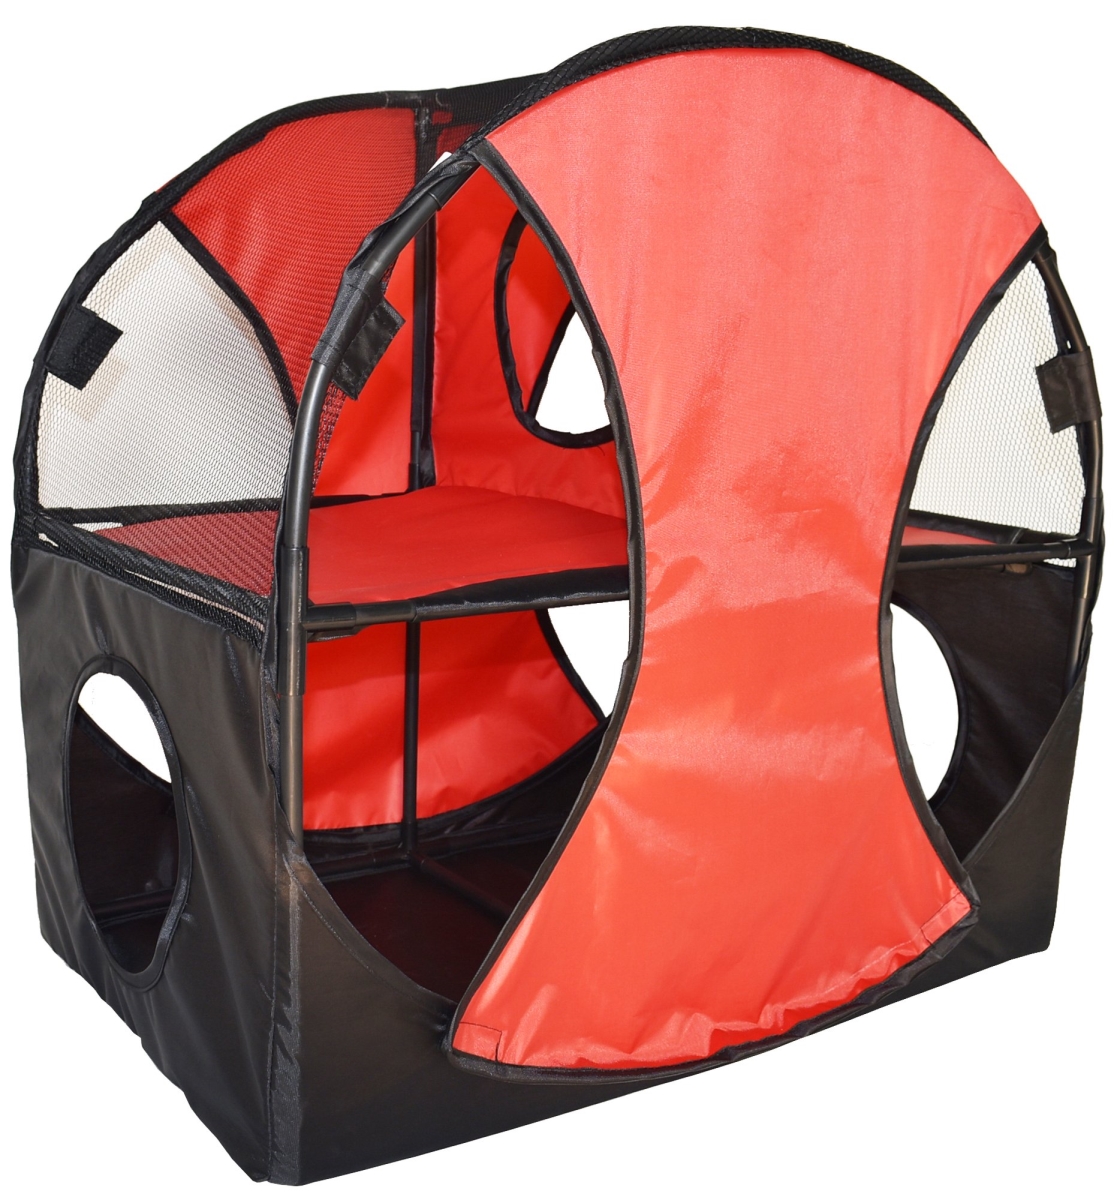 Kitty Play Pet Cat House, Red & Black - One Size